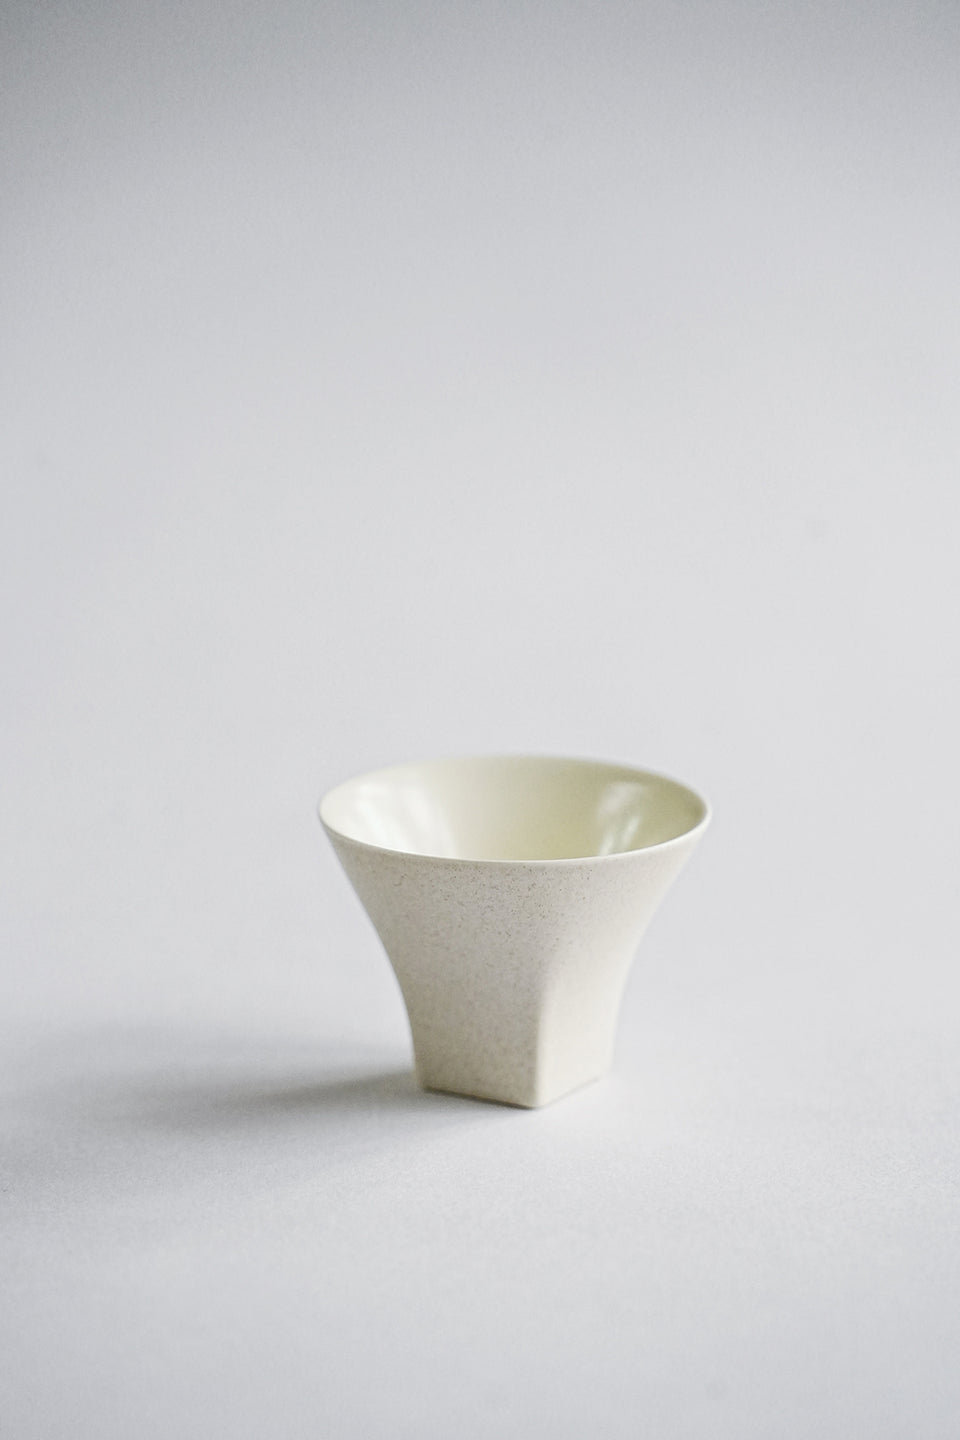 Black and White Square Teacup